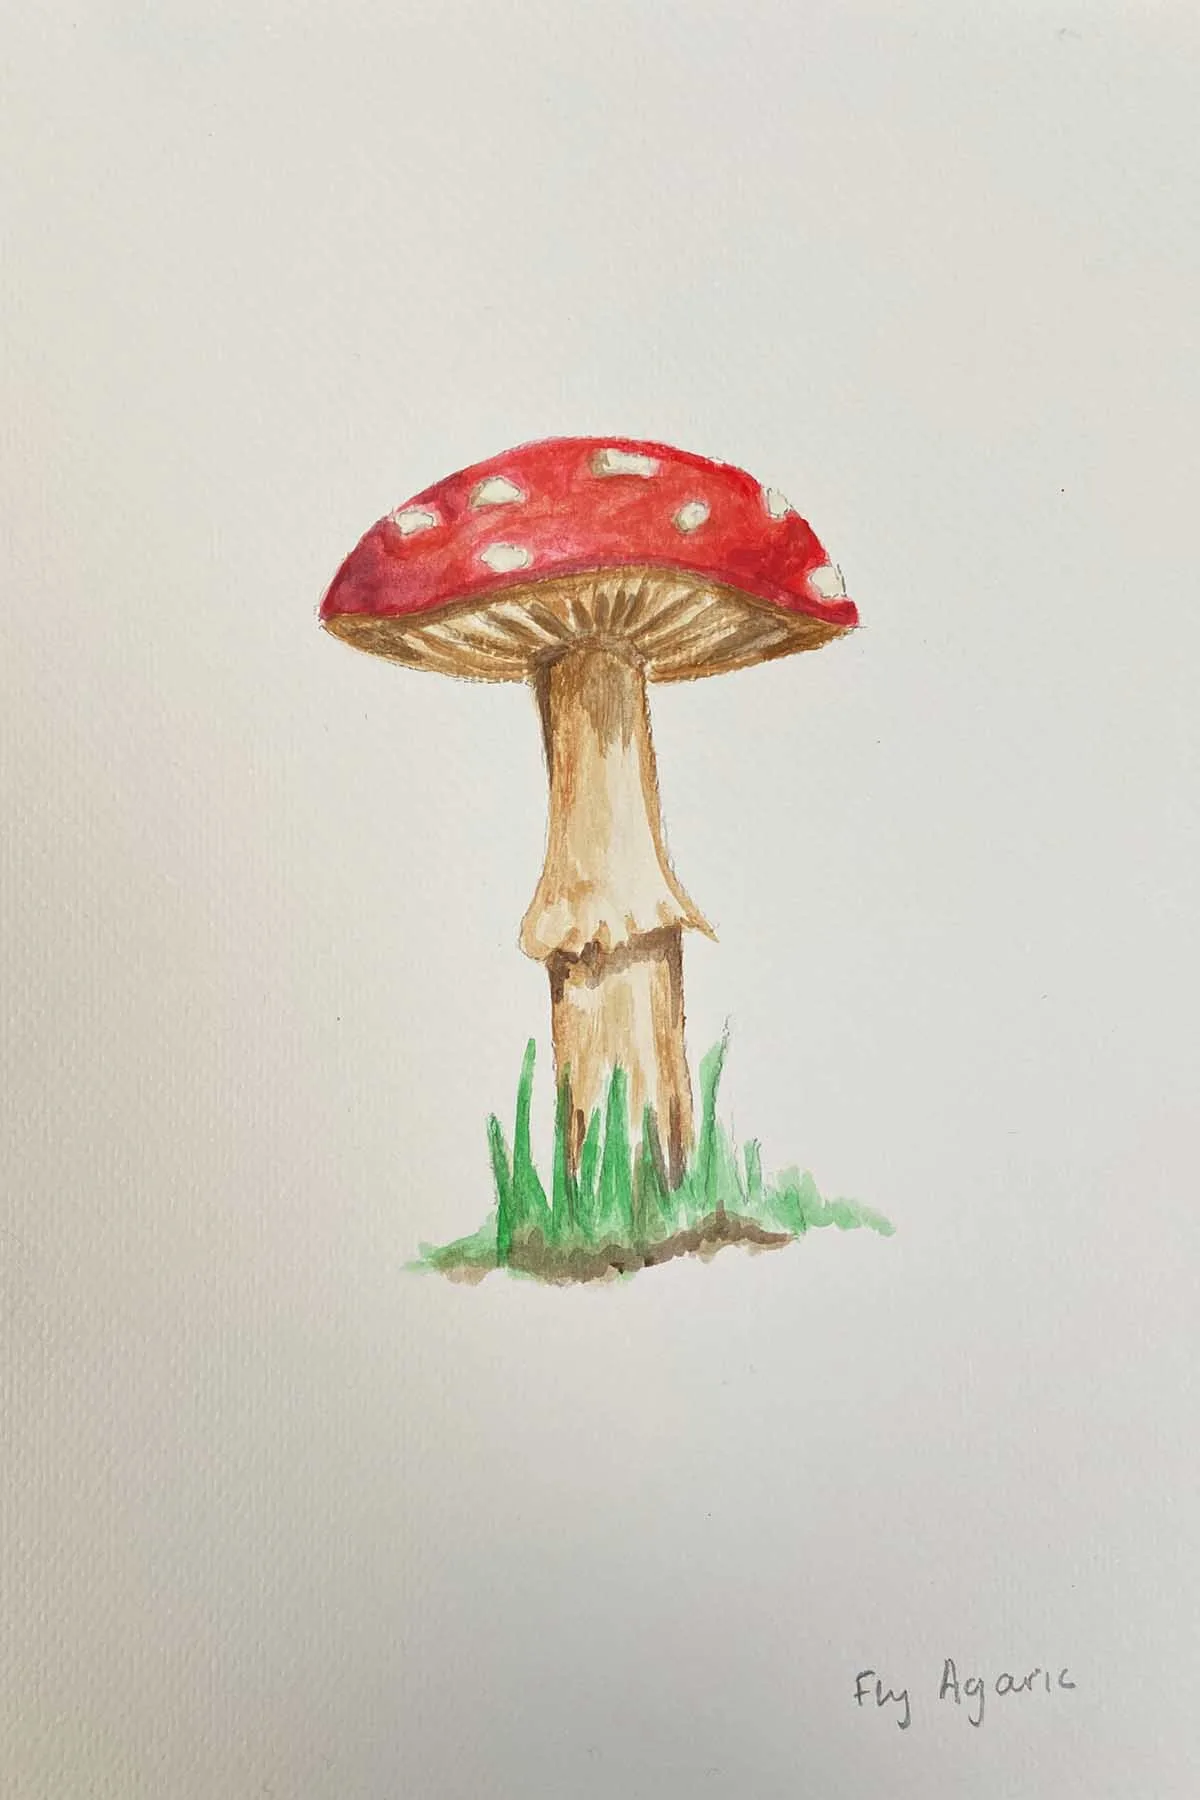 Finished drawn and painted fly agaric mushroom